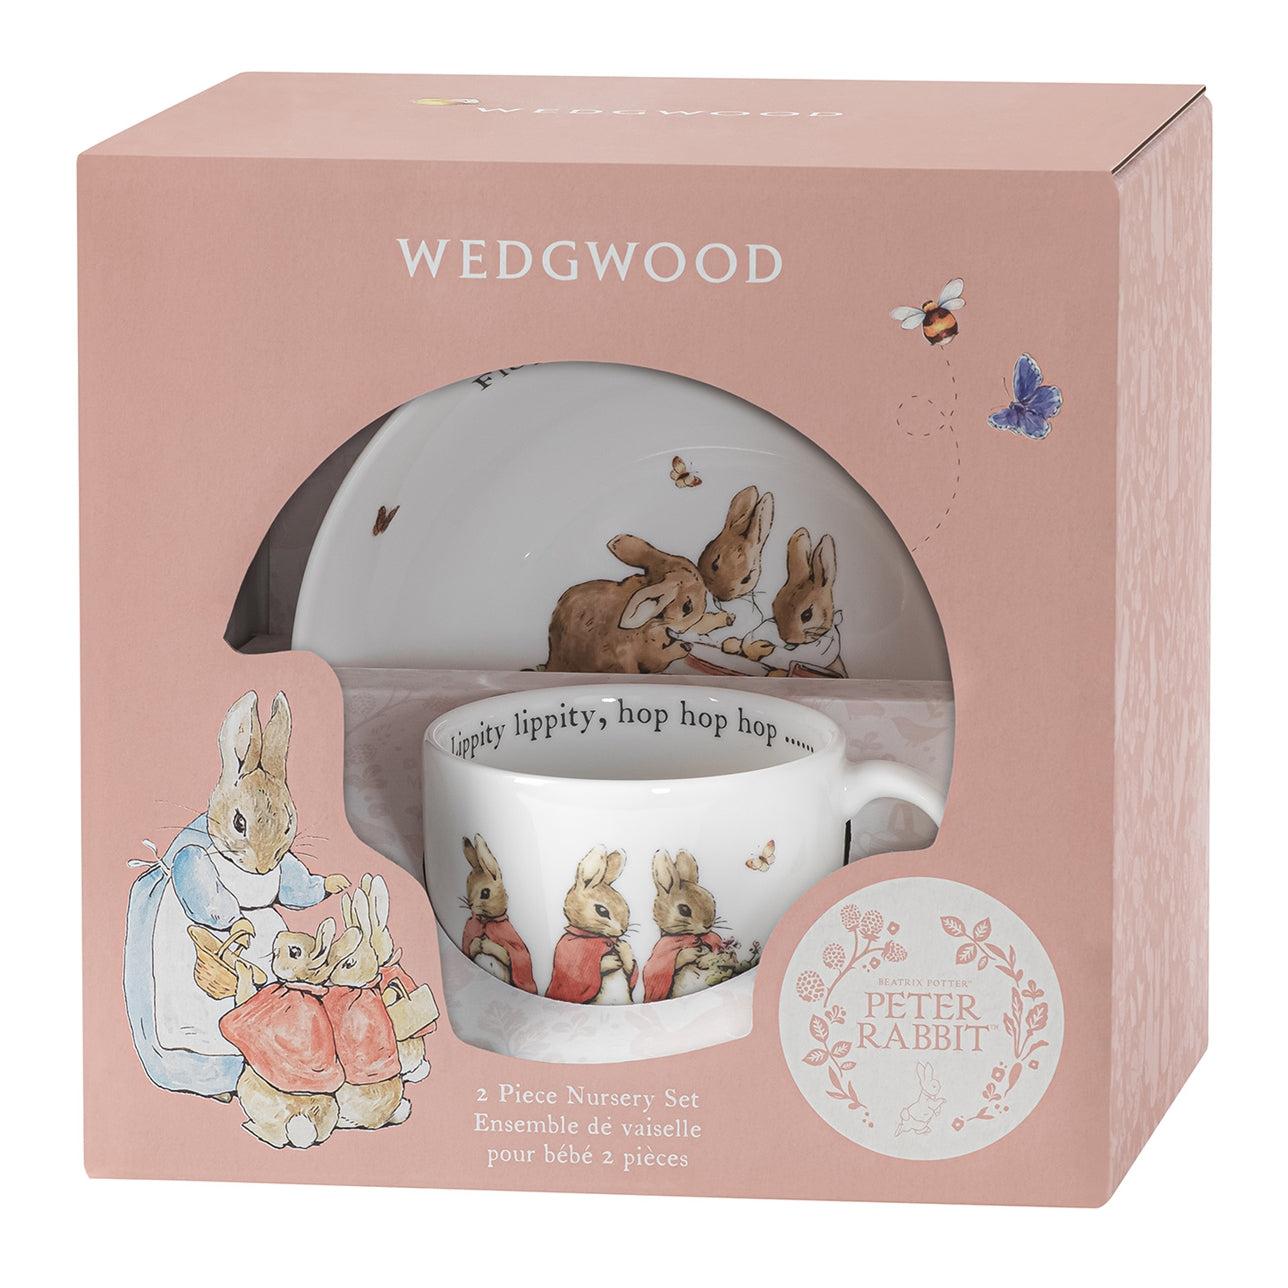 Wedgwood Flopsy, Mopsy and Cottontail 2 Piece Set  Unlock the curious imaginations of children in your life with Beatrix Potter’s cute trio Flopsy, Mopsy and Cottontail. This 2-piece set includes a fine bone china bowl and mug and features the three sisters of Peter Rabbit across all three pieces.